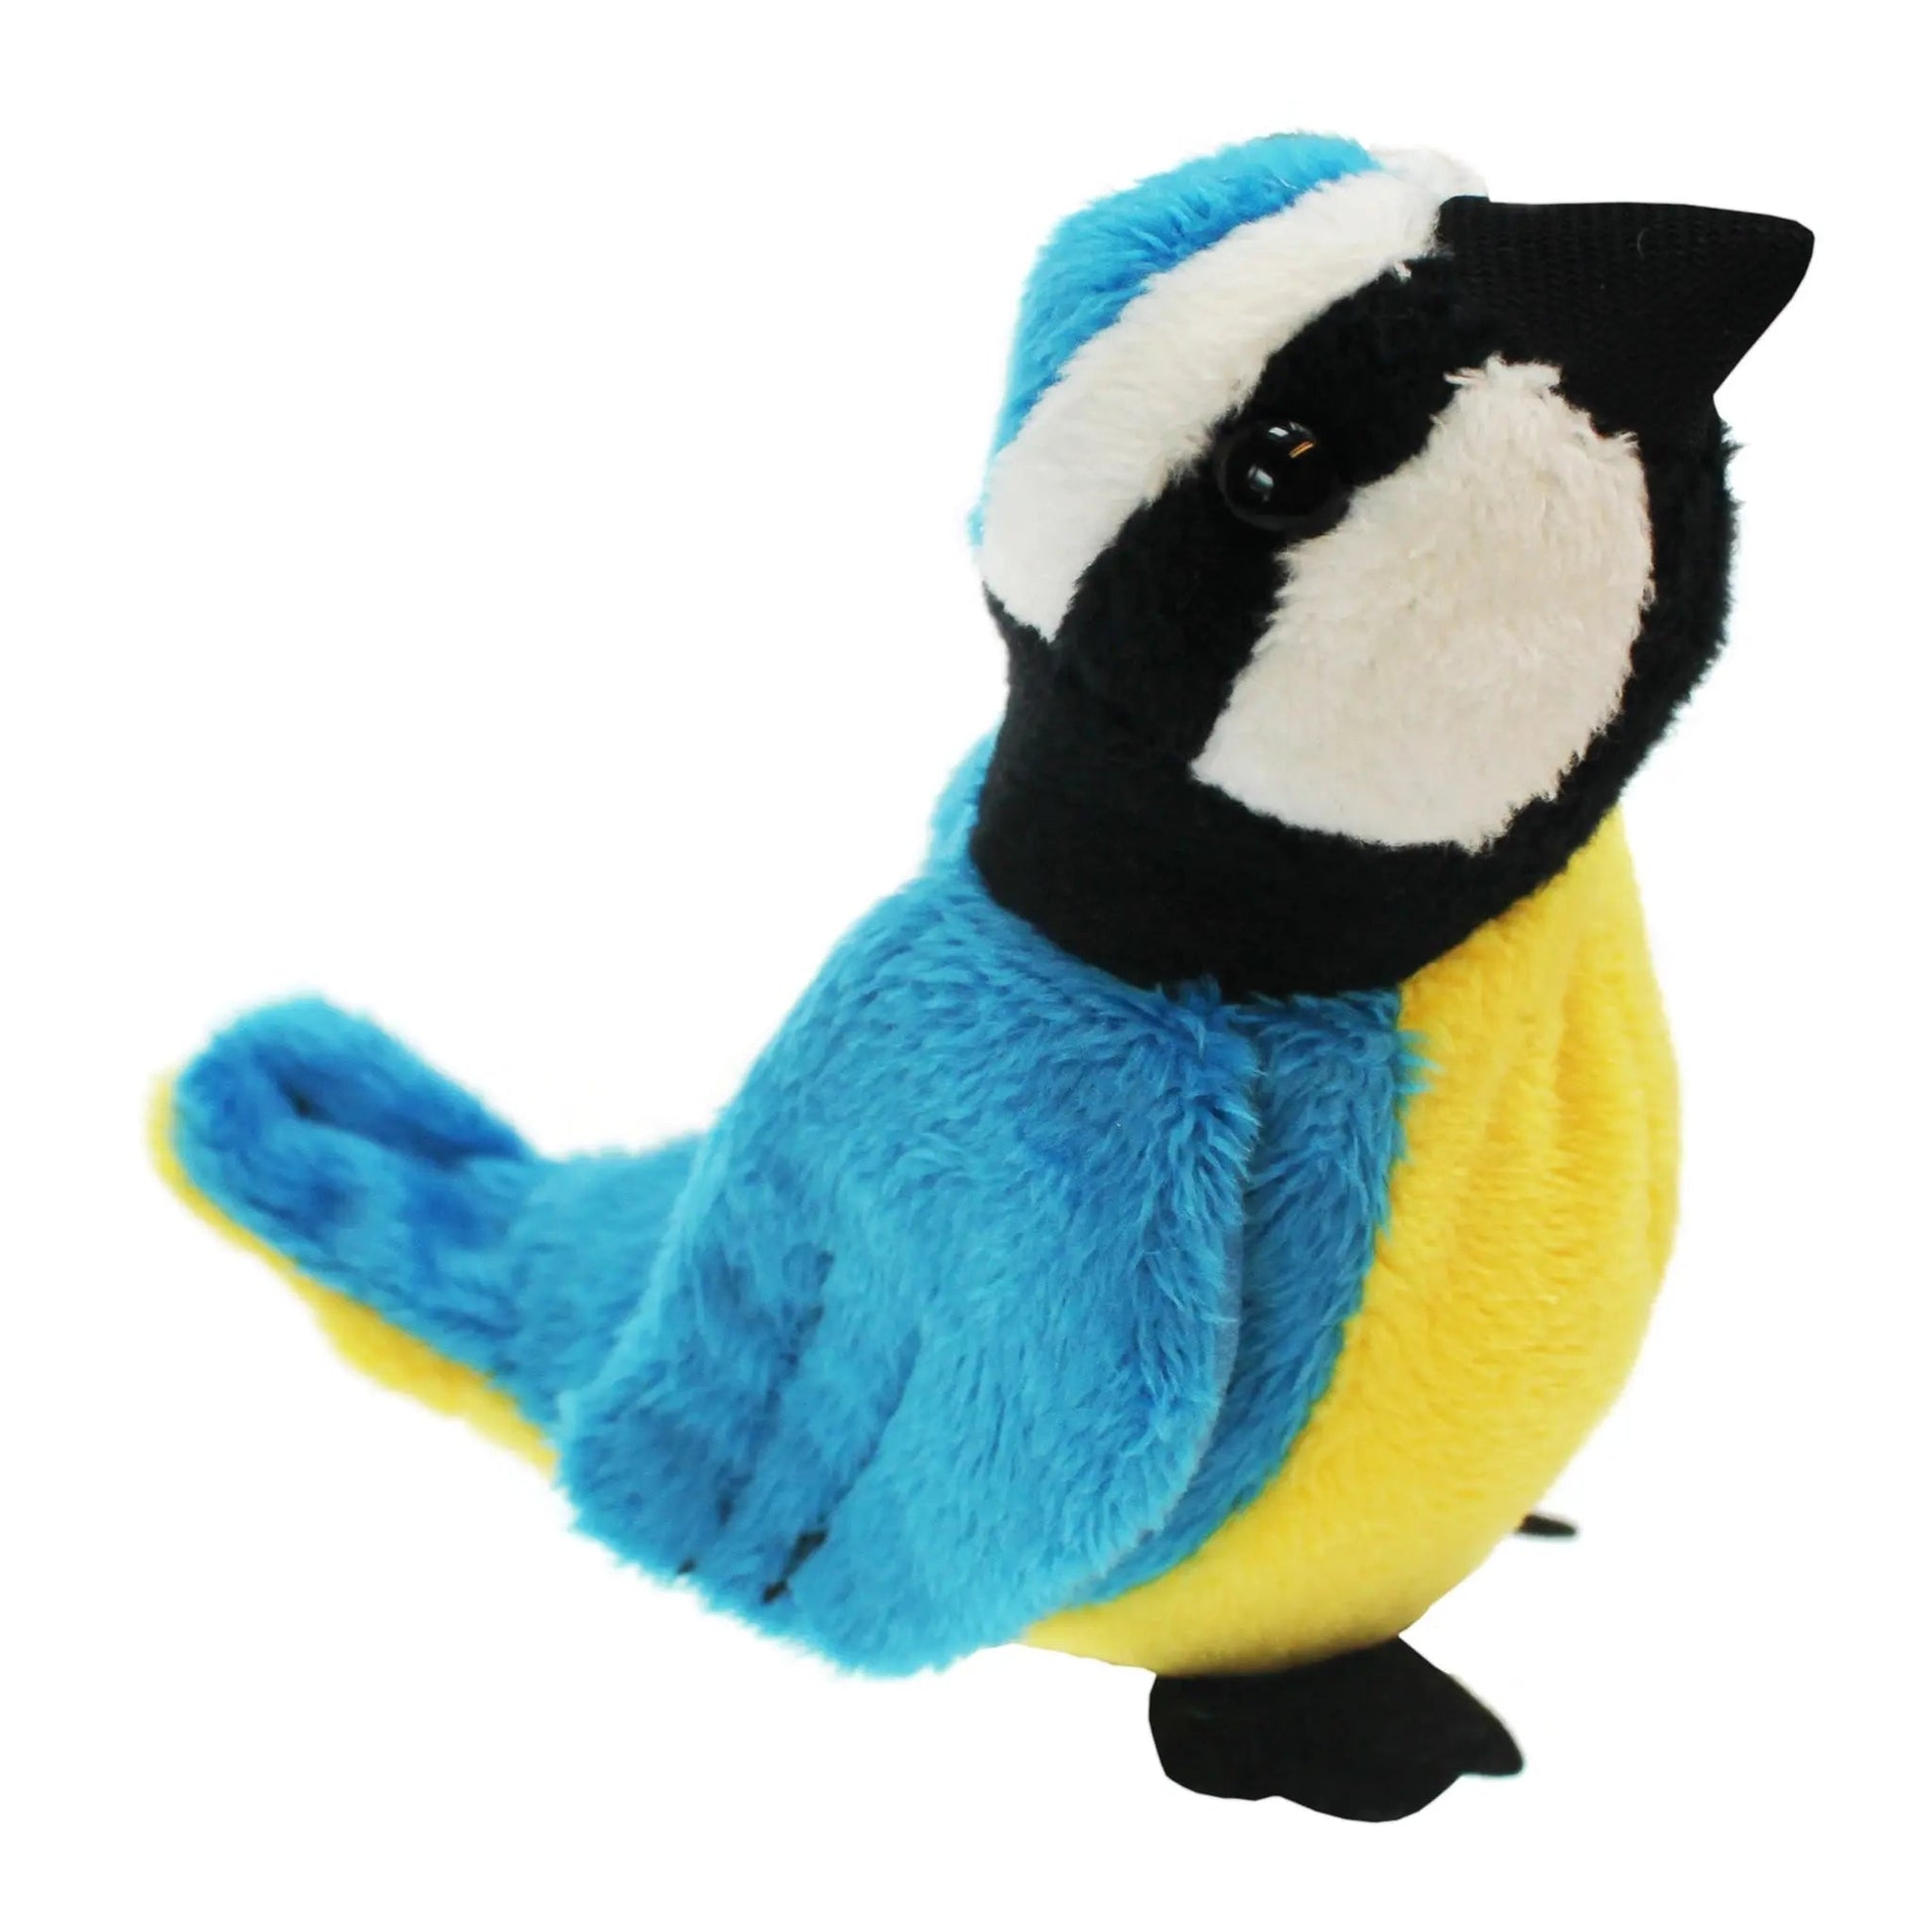 Blue Tit Finger Puppet - The Puppet Company - The Forgotten Toy Shop